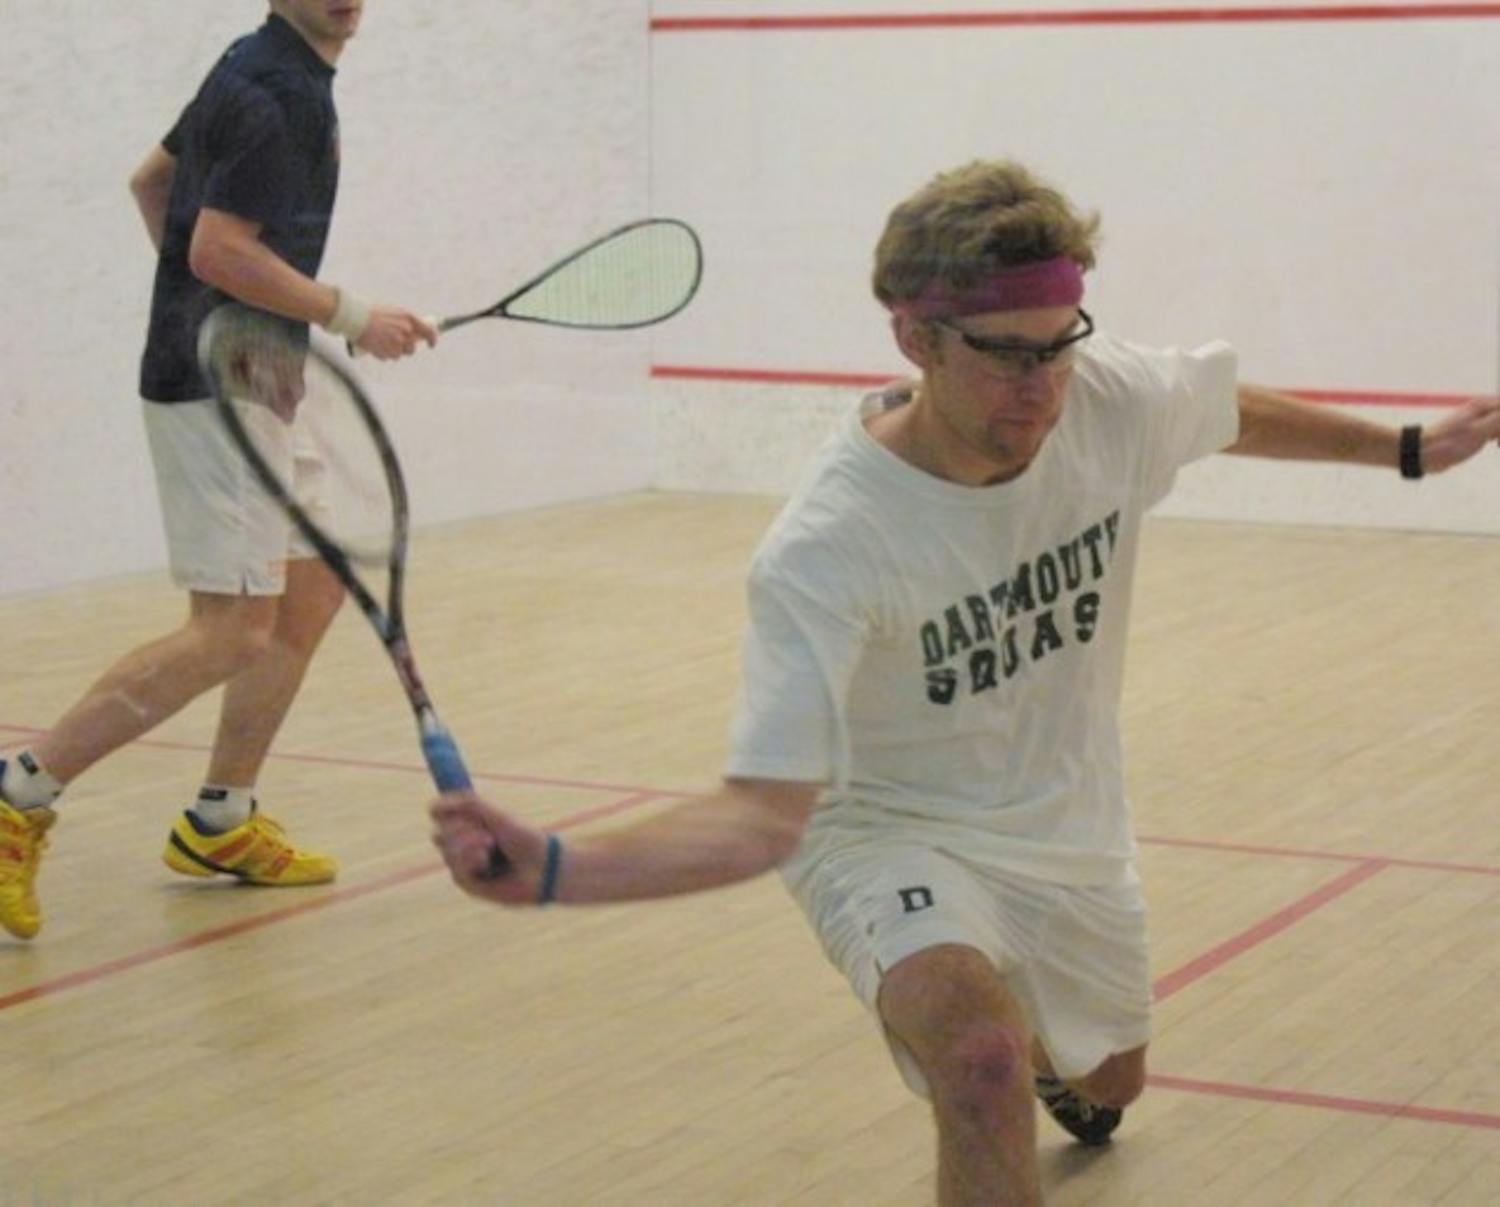 Co-captain Todd Wood '07, sporting a purple headband, has led the men's squash team to its early successes.